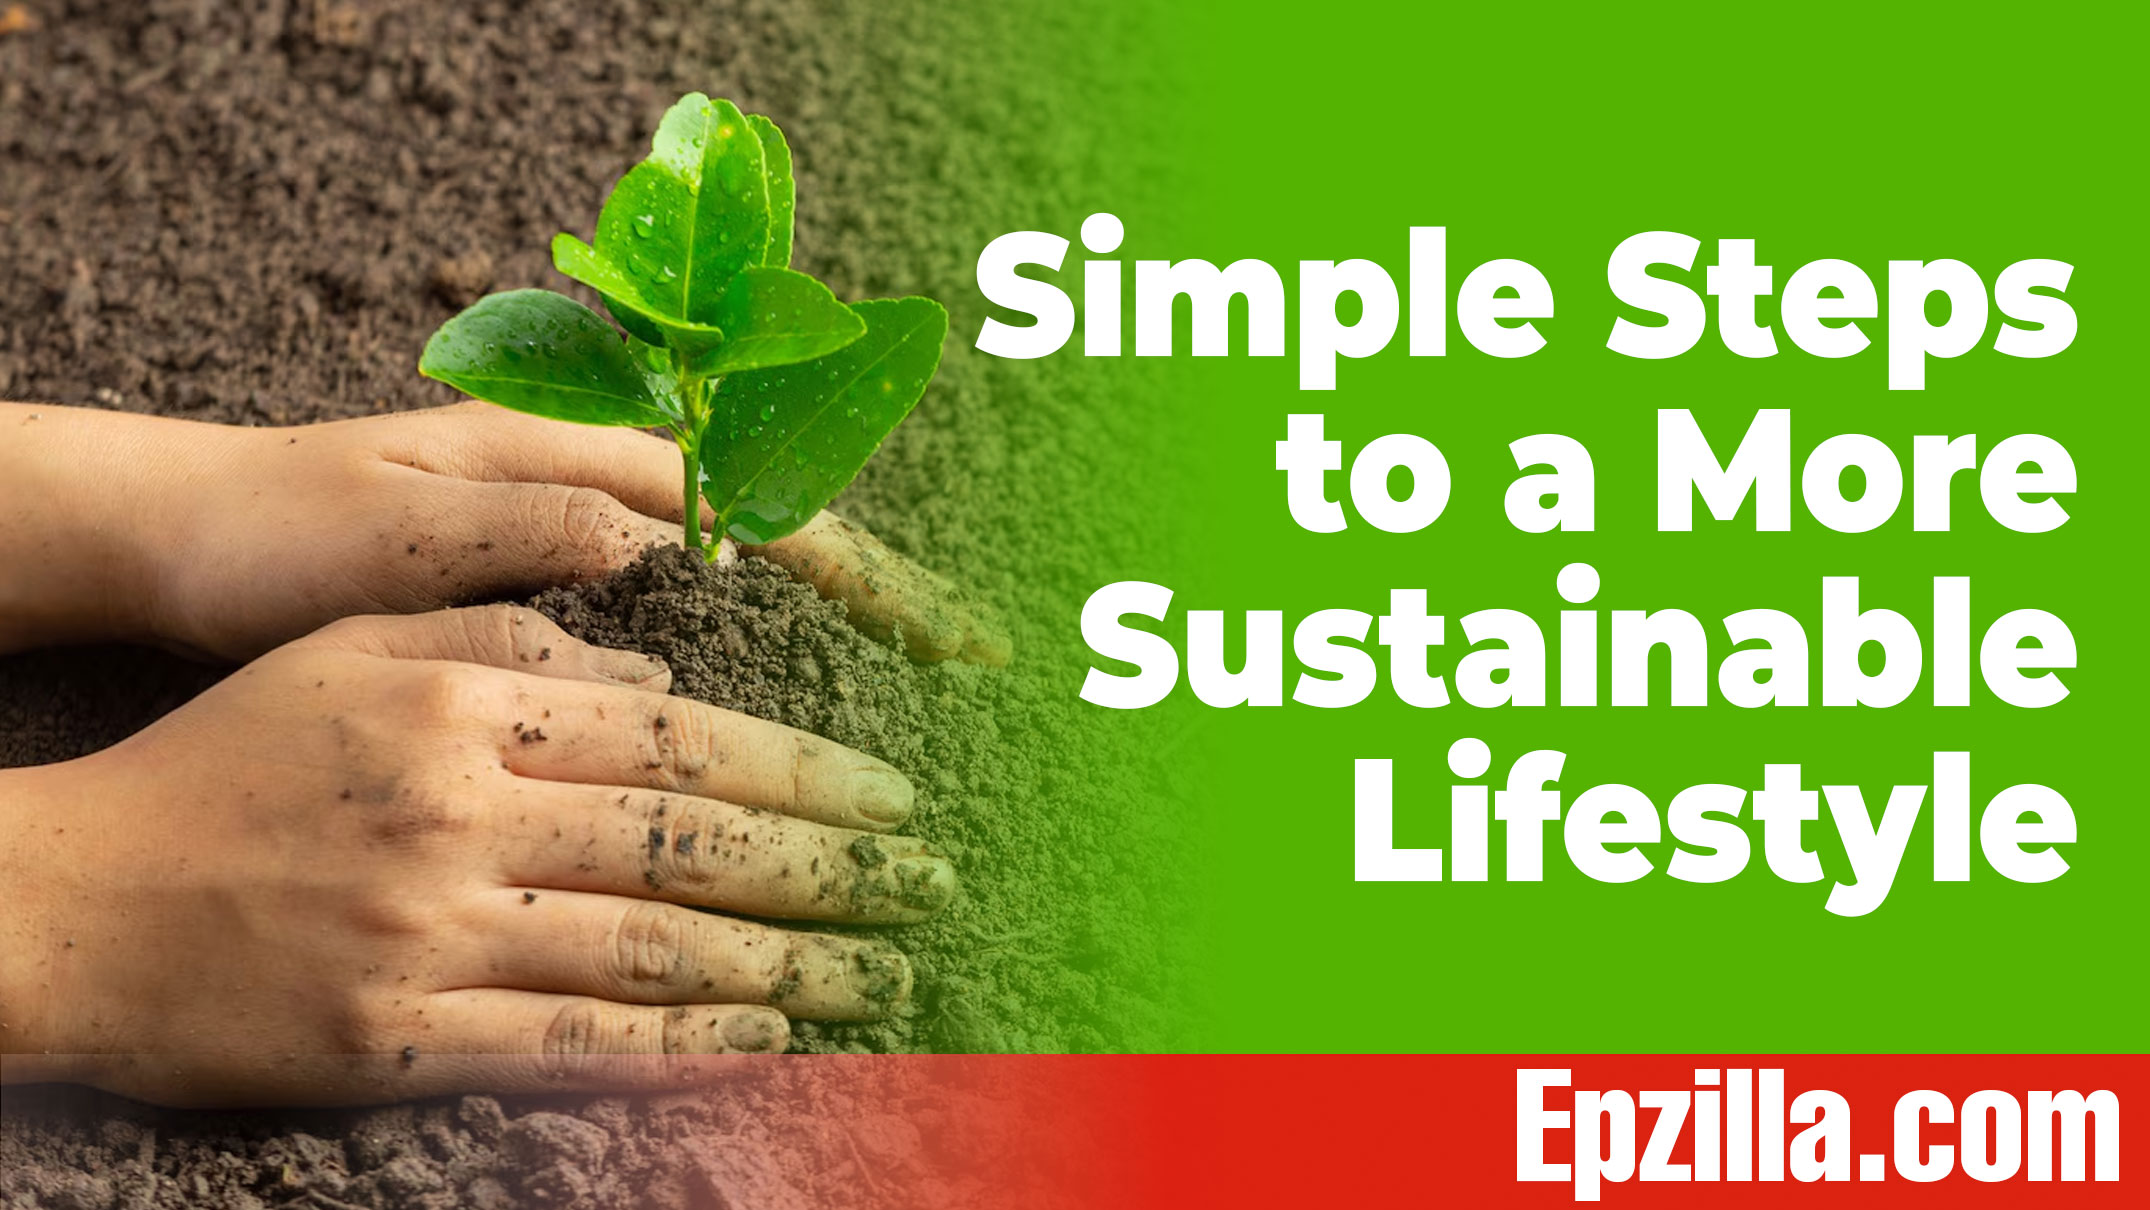 Green Living 101 Simple Steps to a More Sustainable Lifestyle Epzilla.com